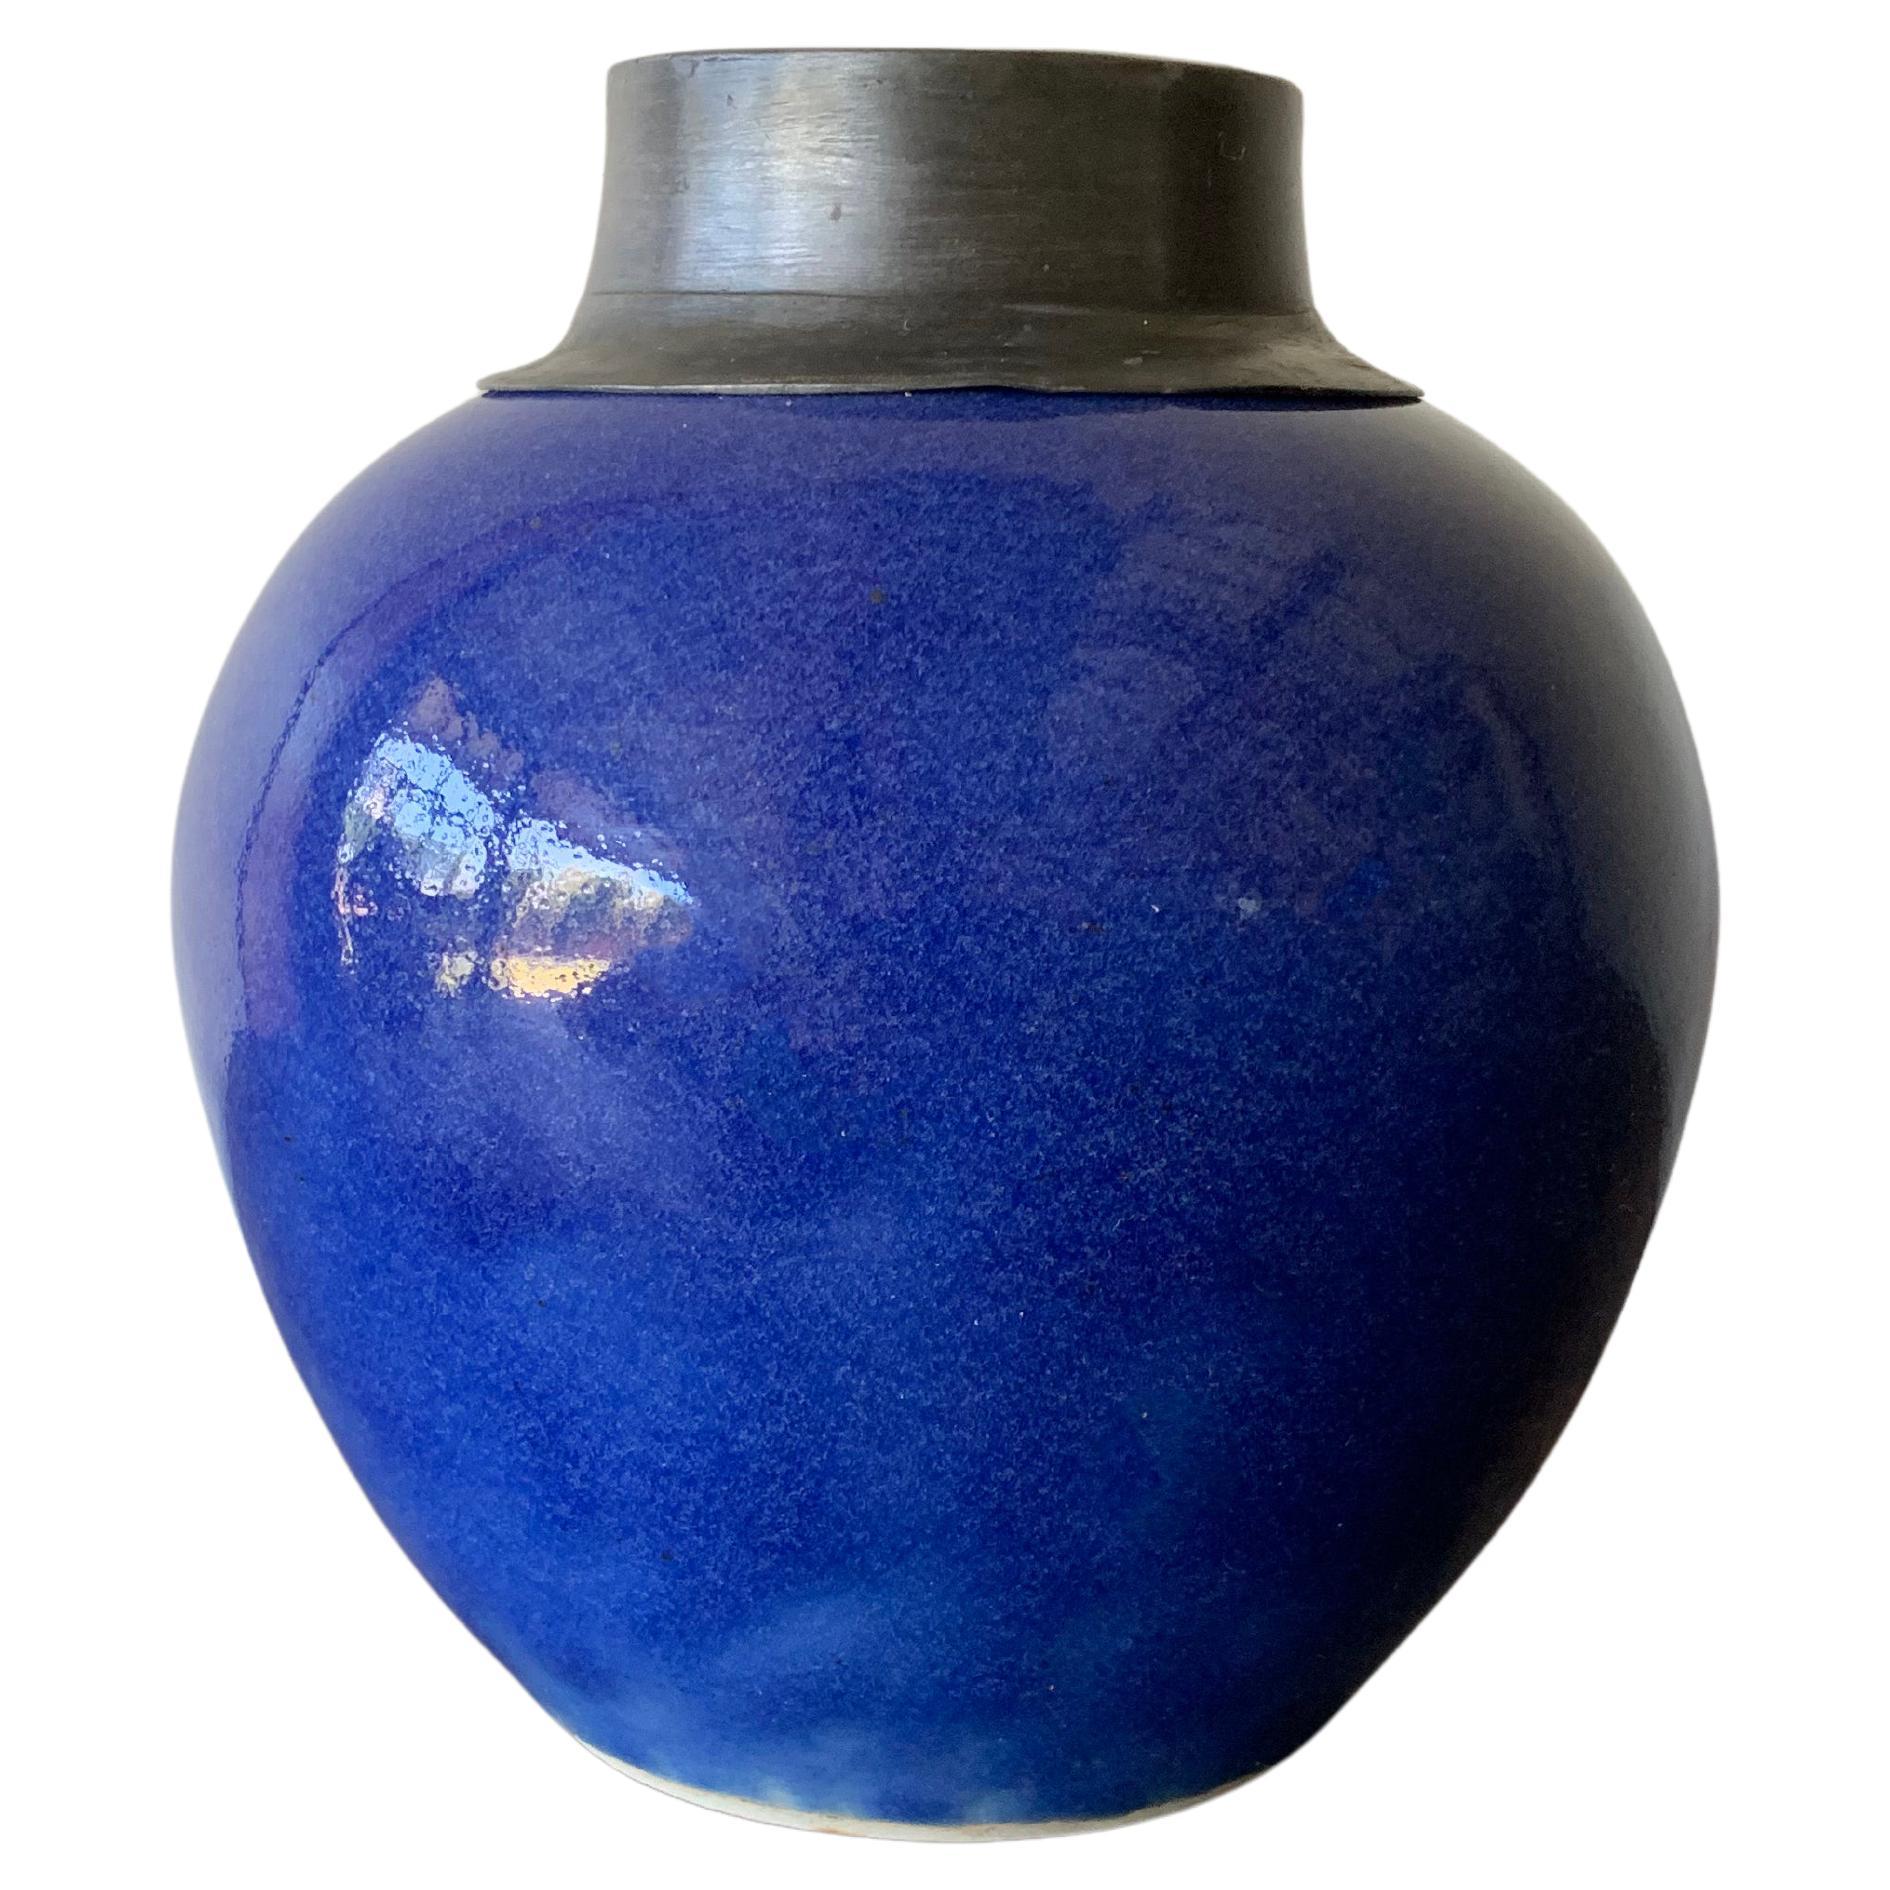 Blue Chinese Ceramic Ginger Jar with Metal Top, Early 20th Century